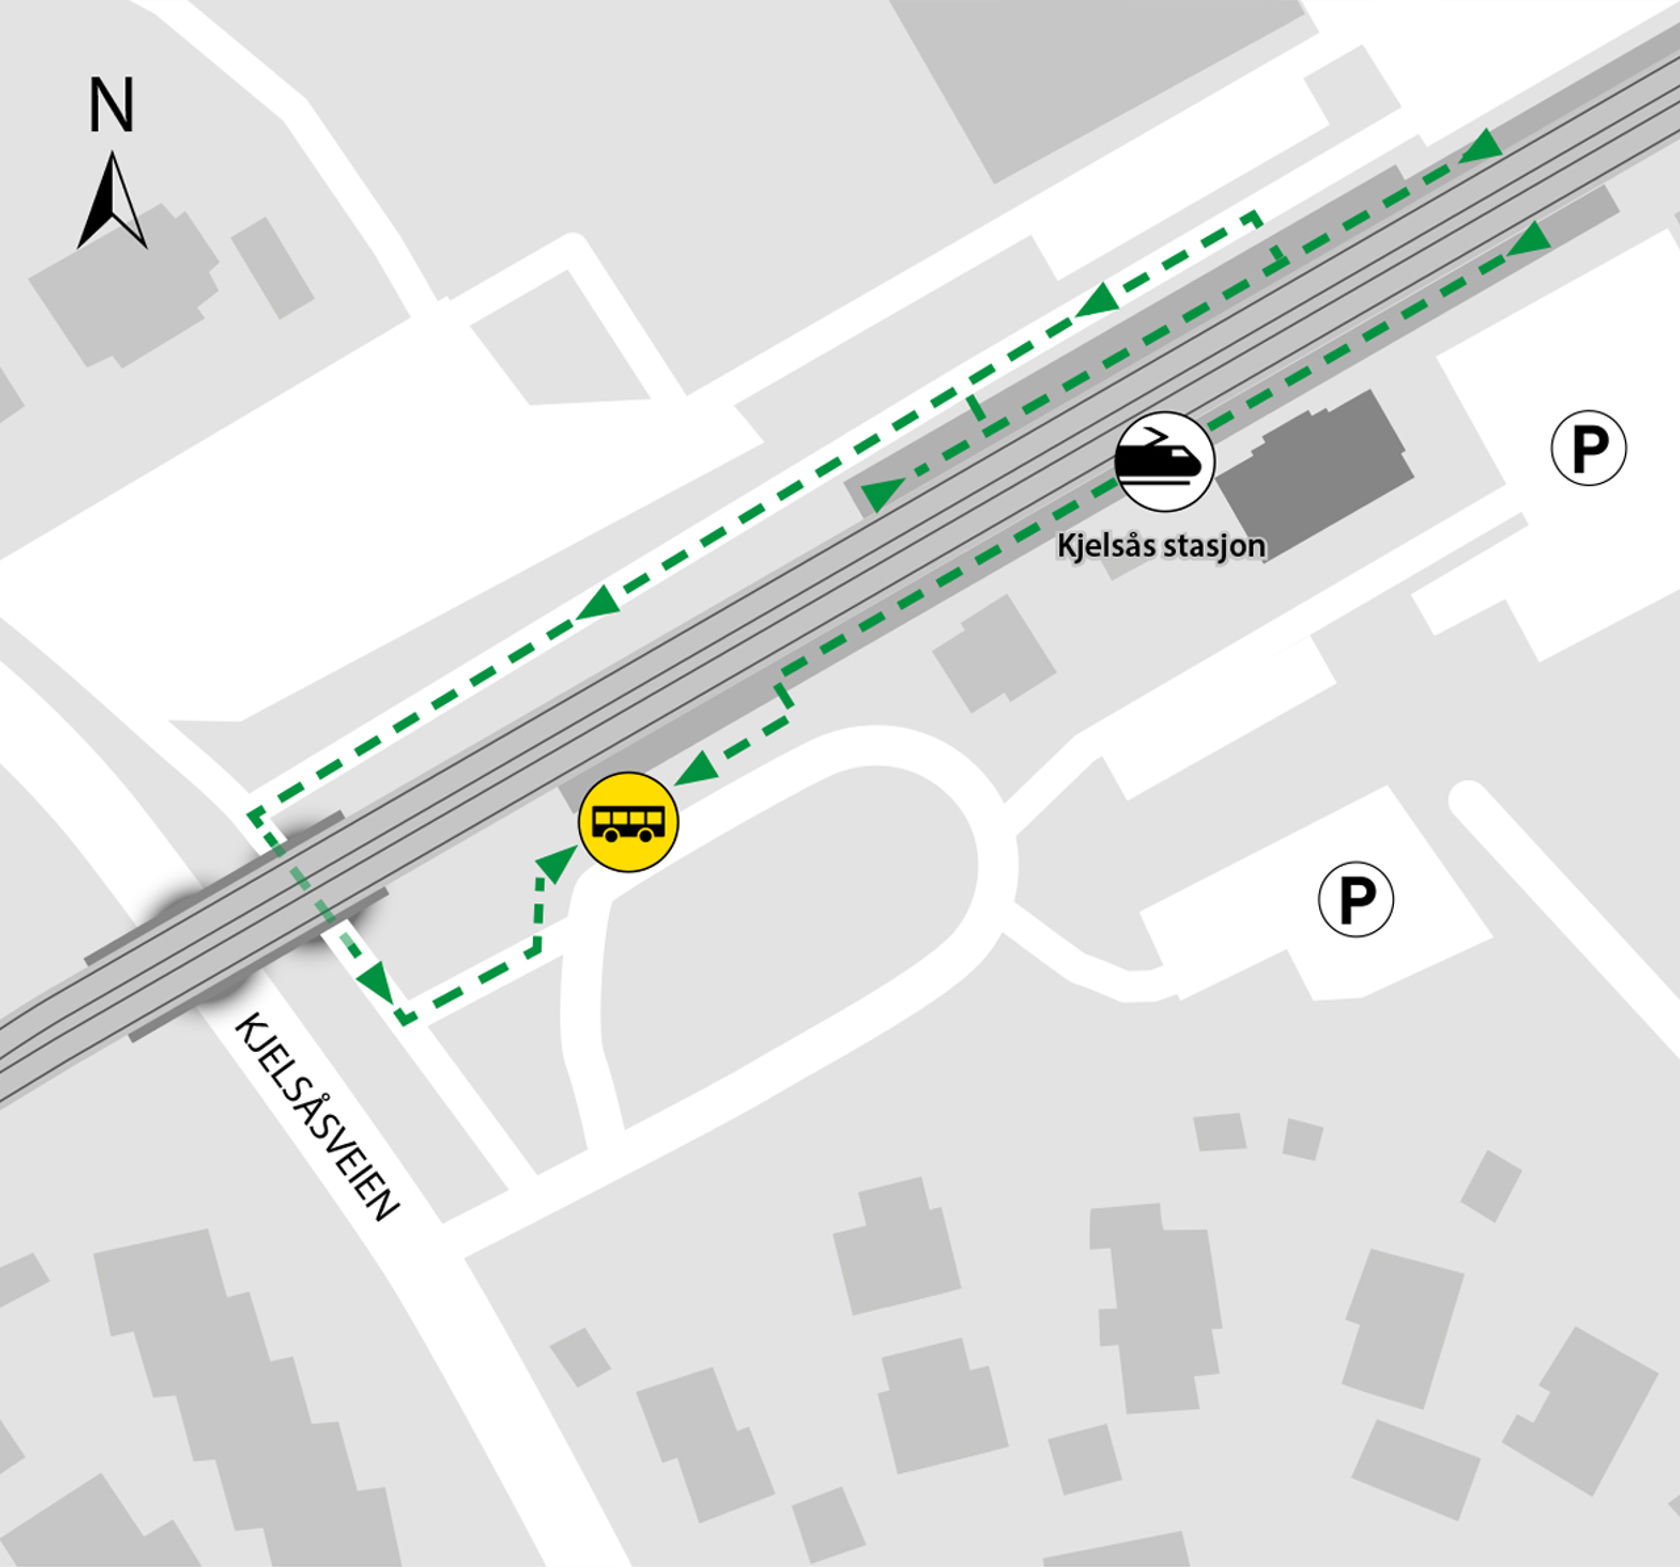 Map shows rail replacement service departs from bus stop Kjelsås station.